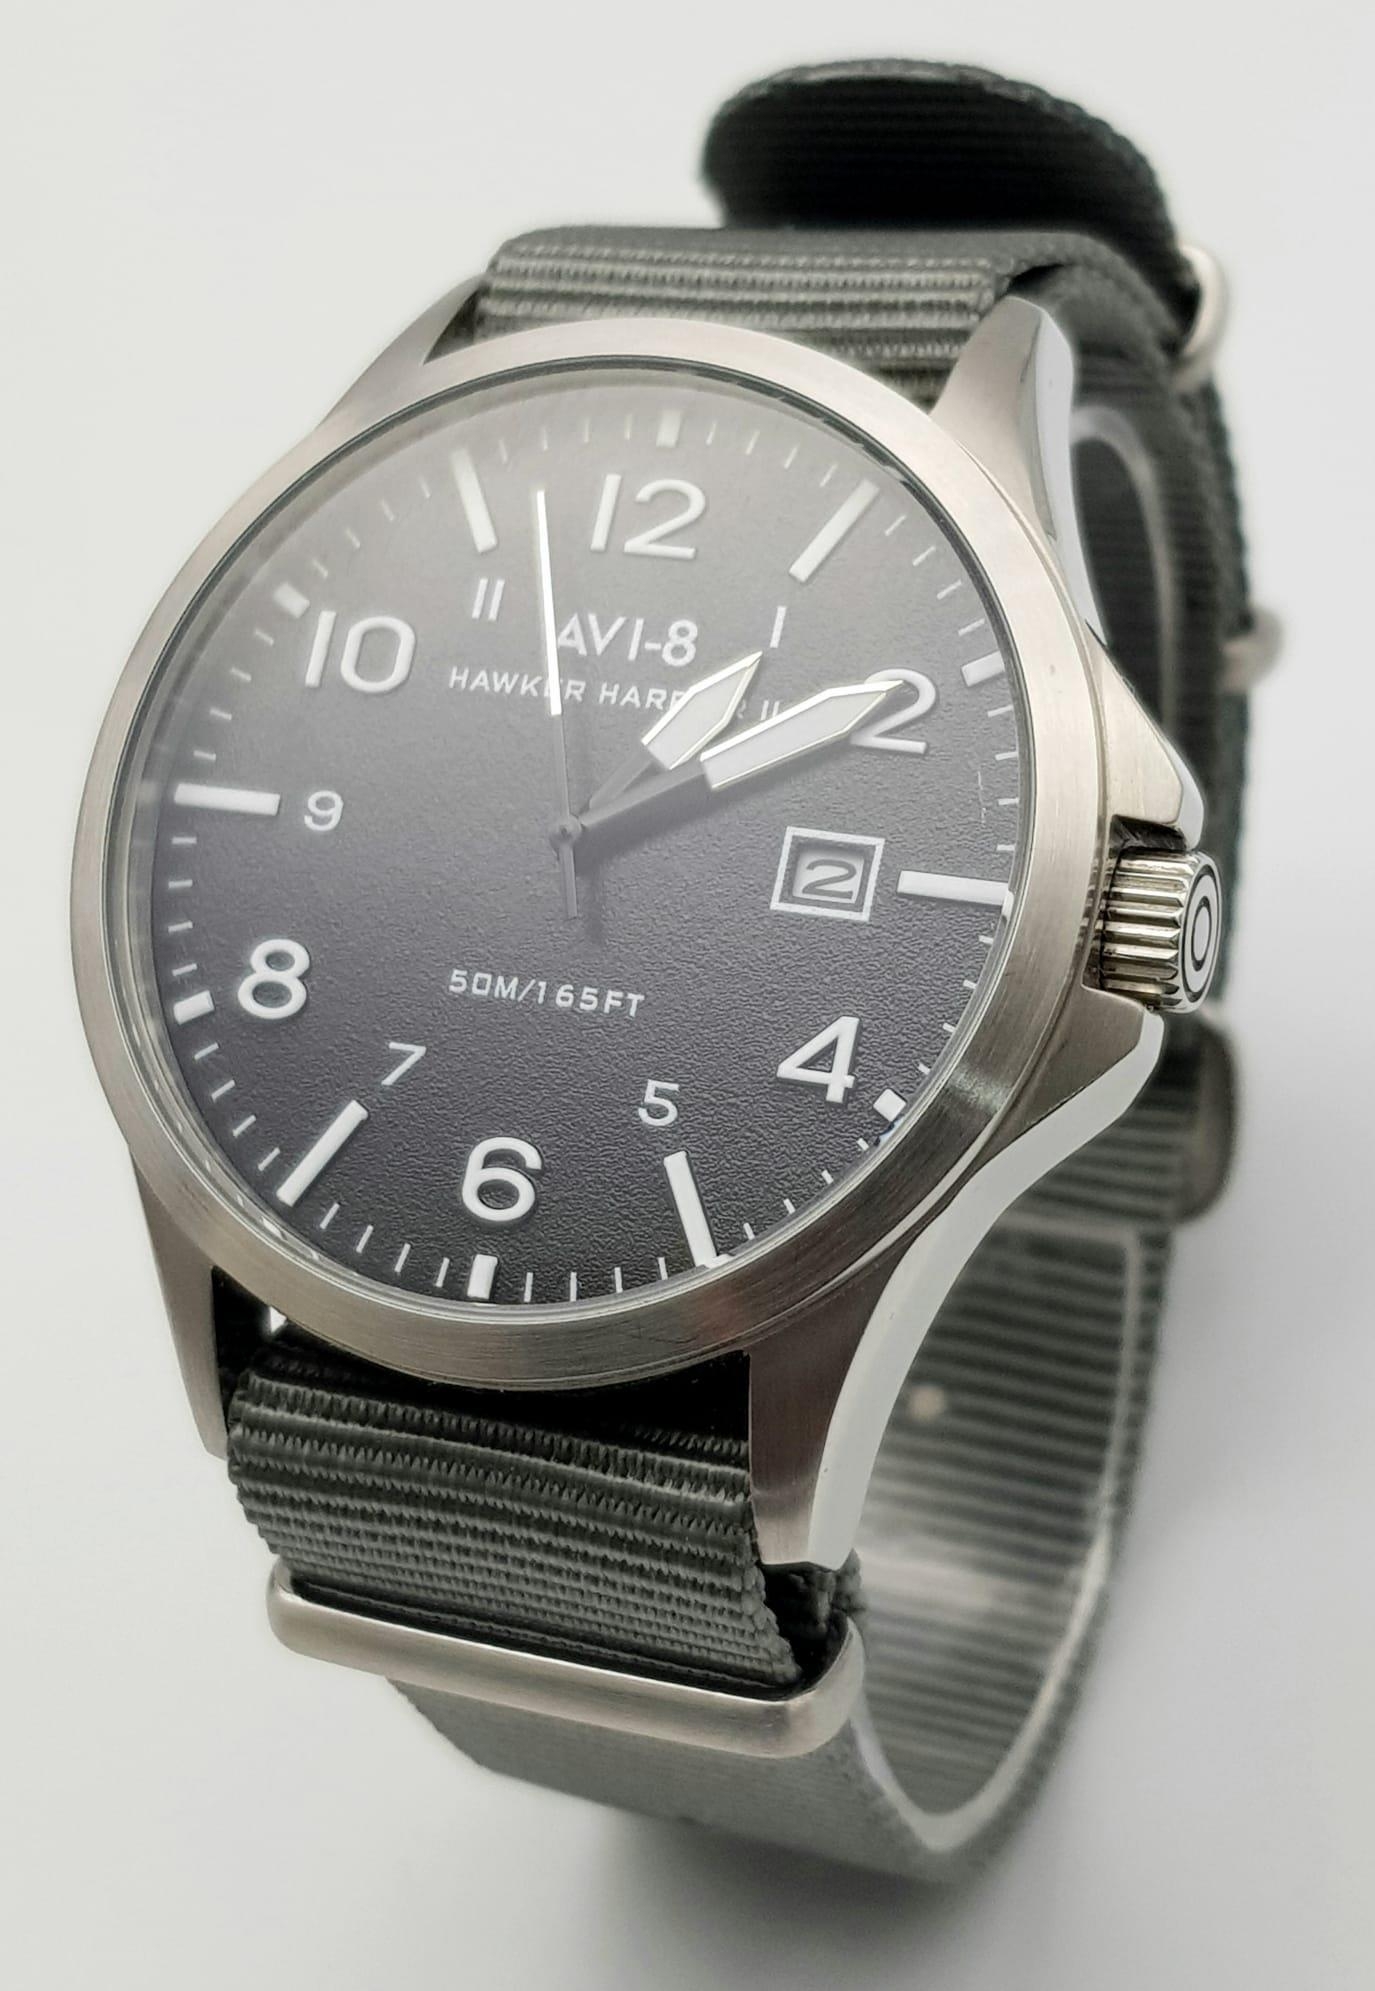 An Unworn Hawker Hurricane Quartz Date Watch by AVI8. 46mm Including Crown. Full Working order on - Image 2 of 7